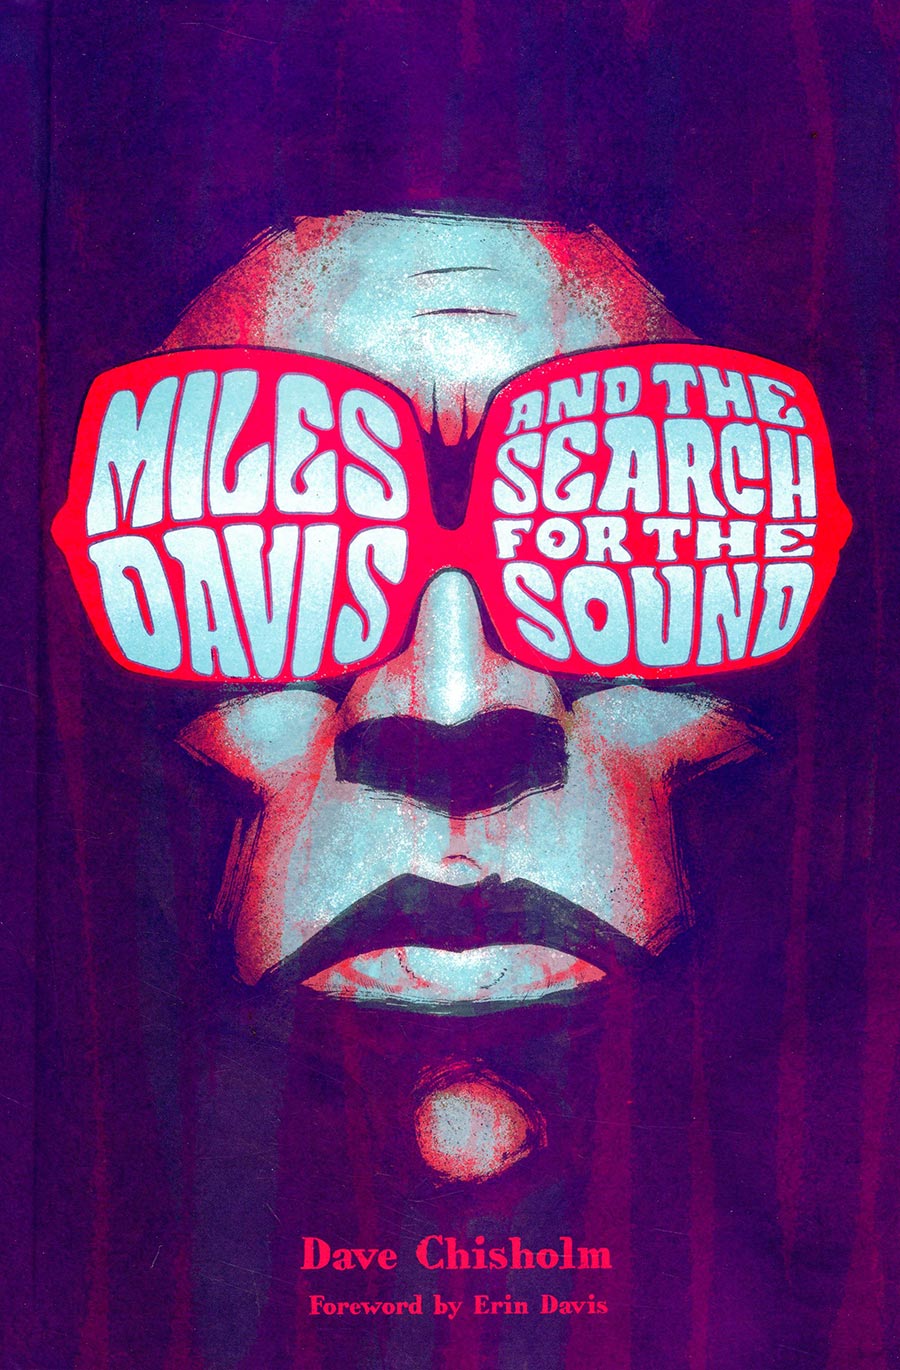 Miles Davis And The Search For The Sound HC